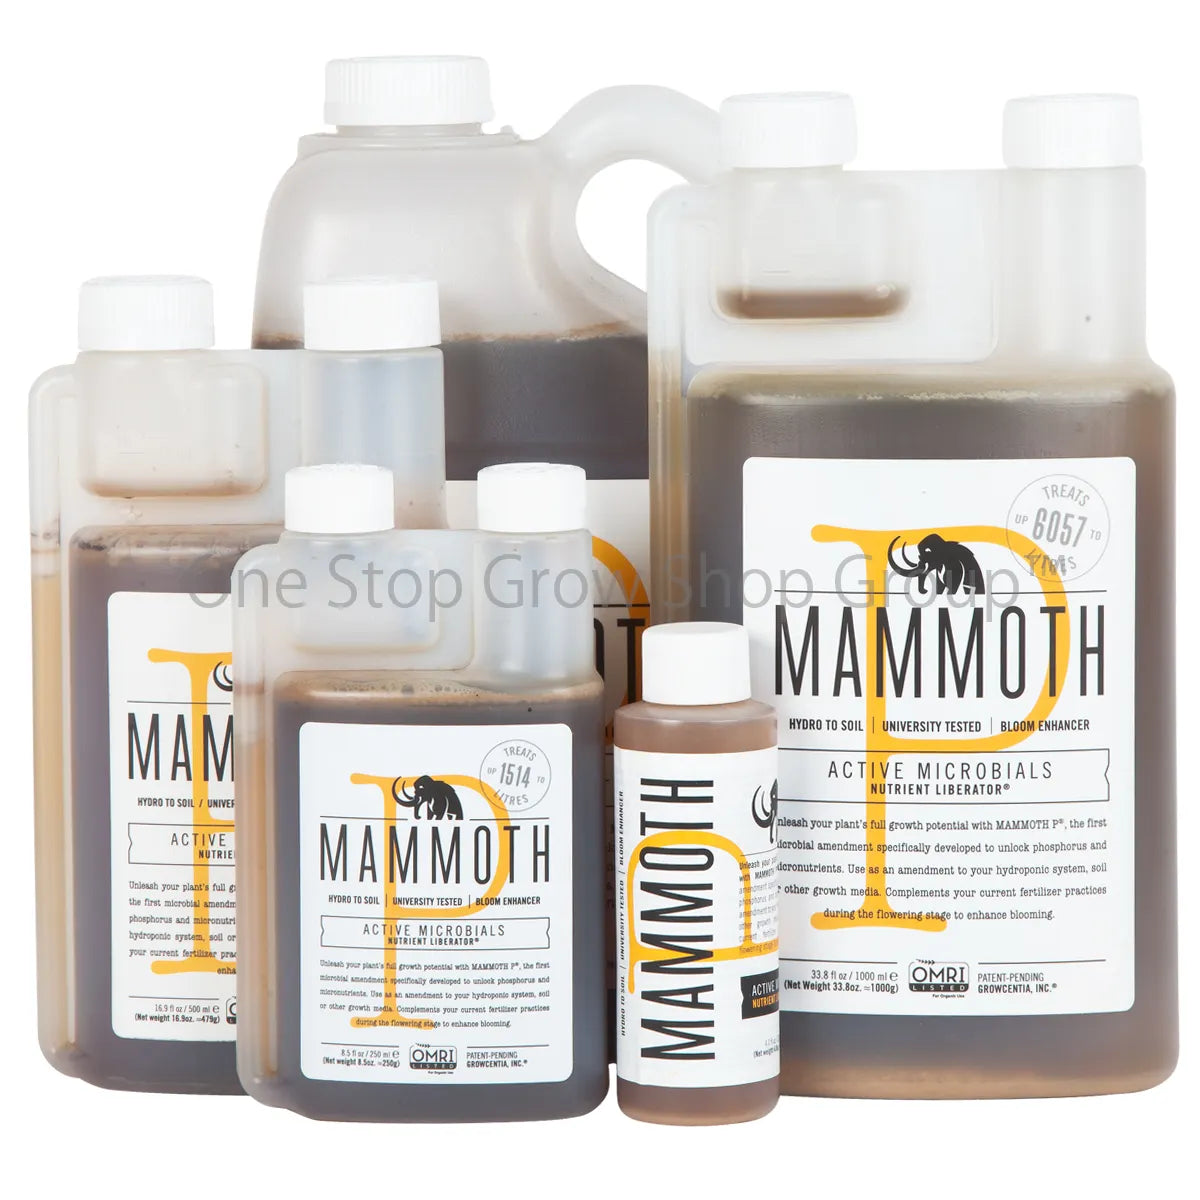 Mammoth P – The First Ever Microbial Bloom Booster!